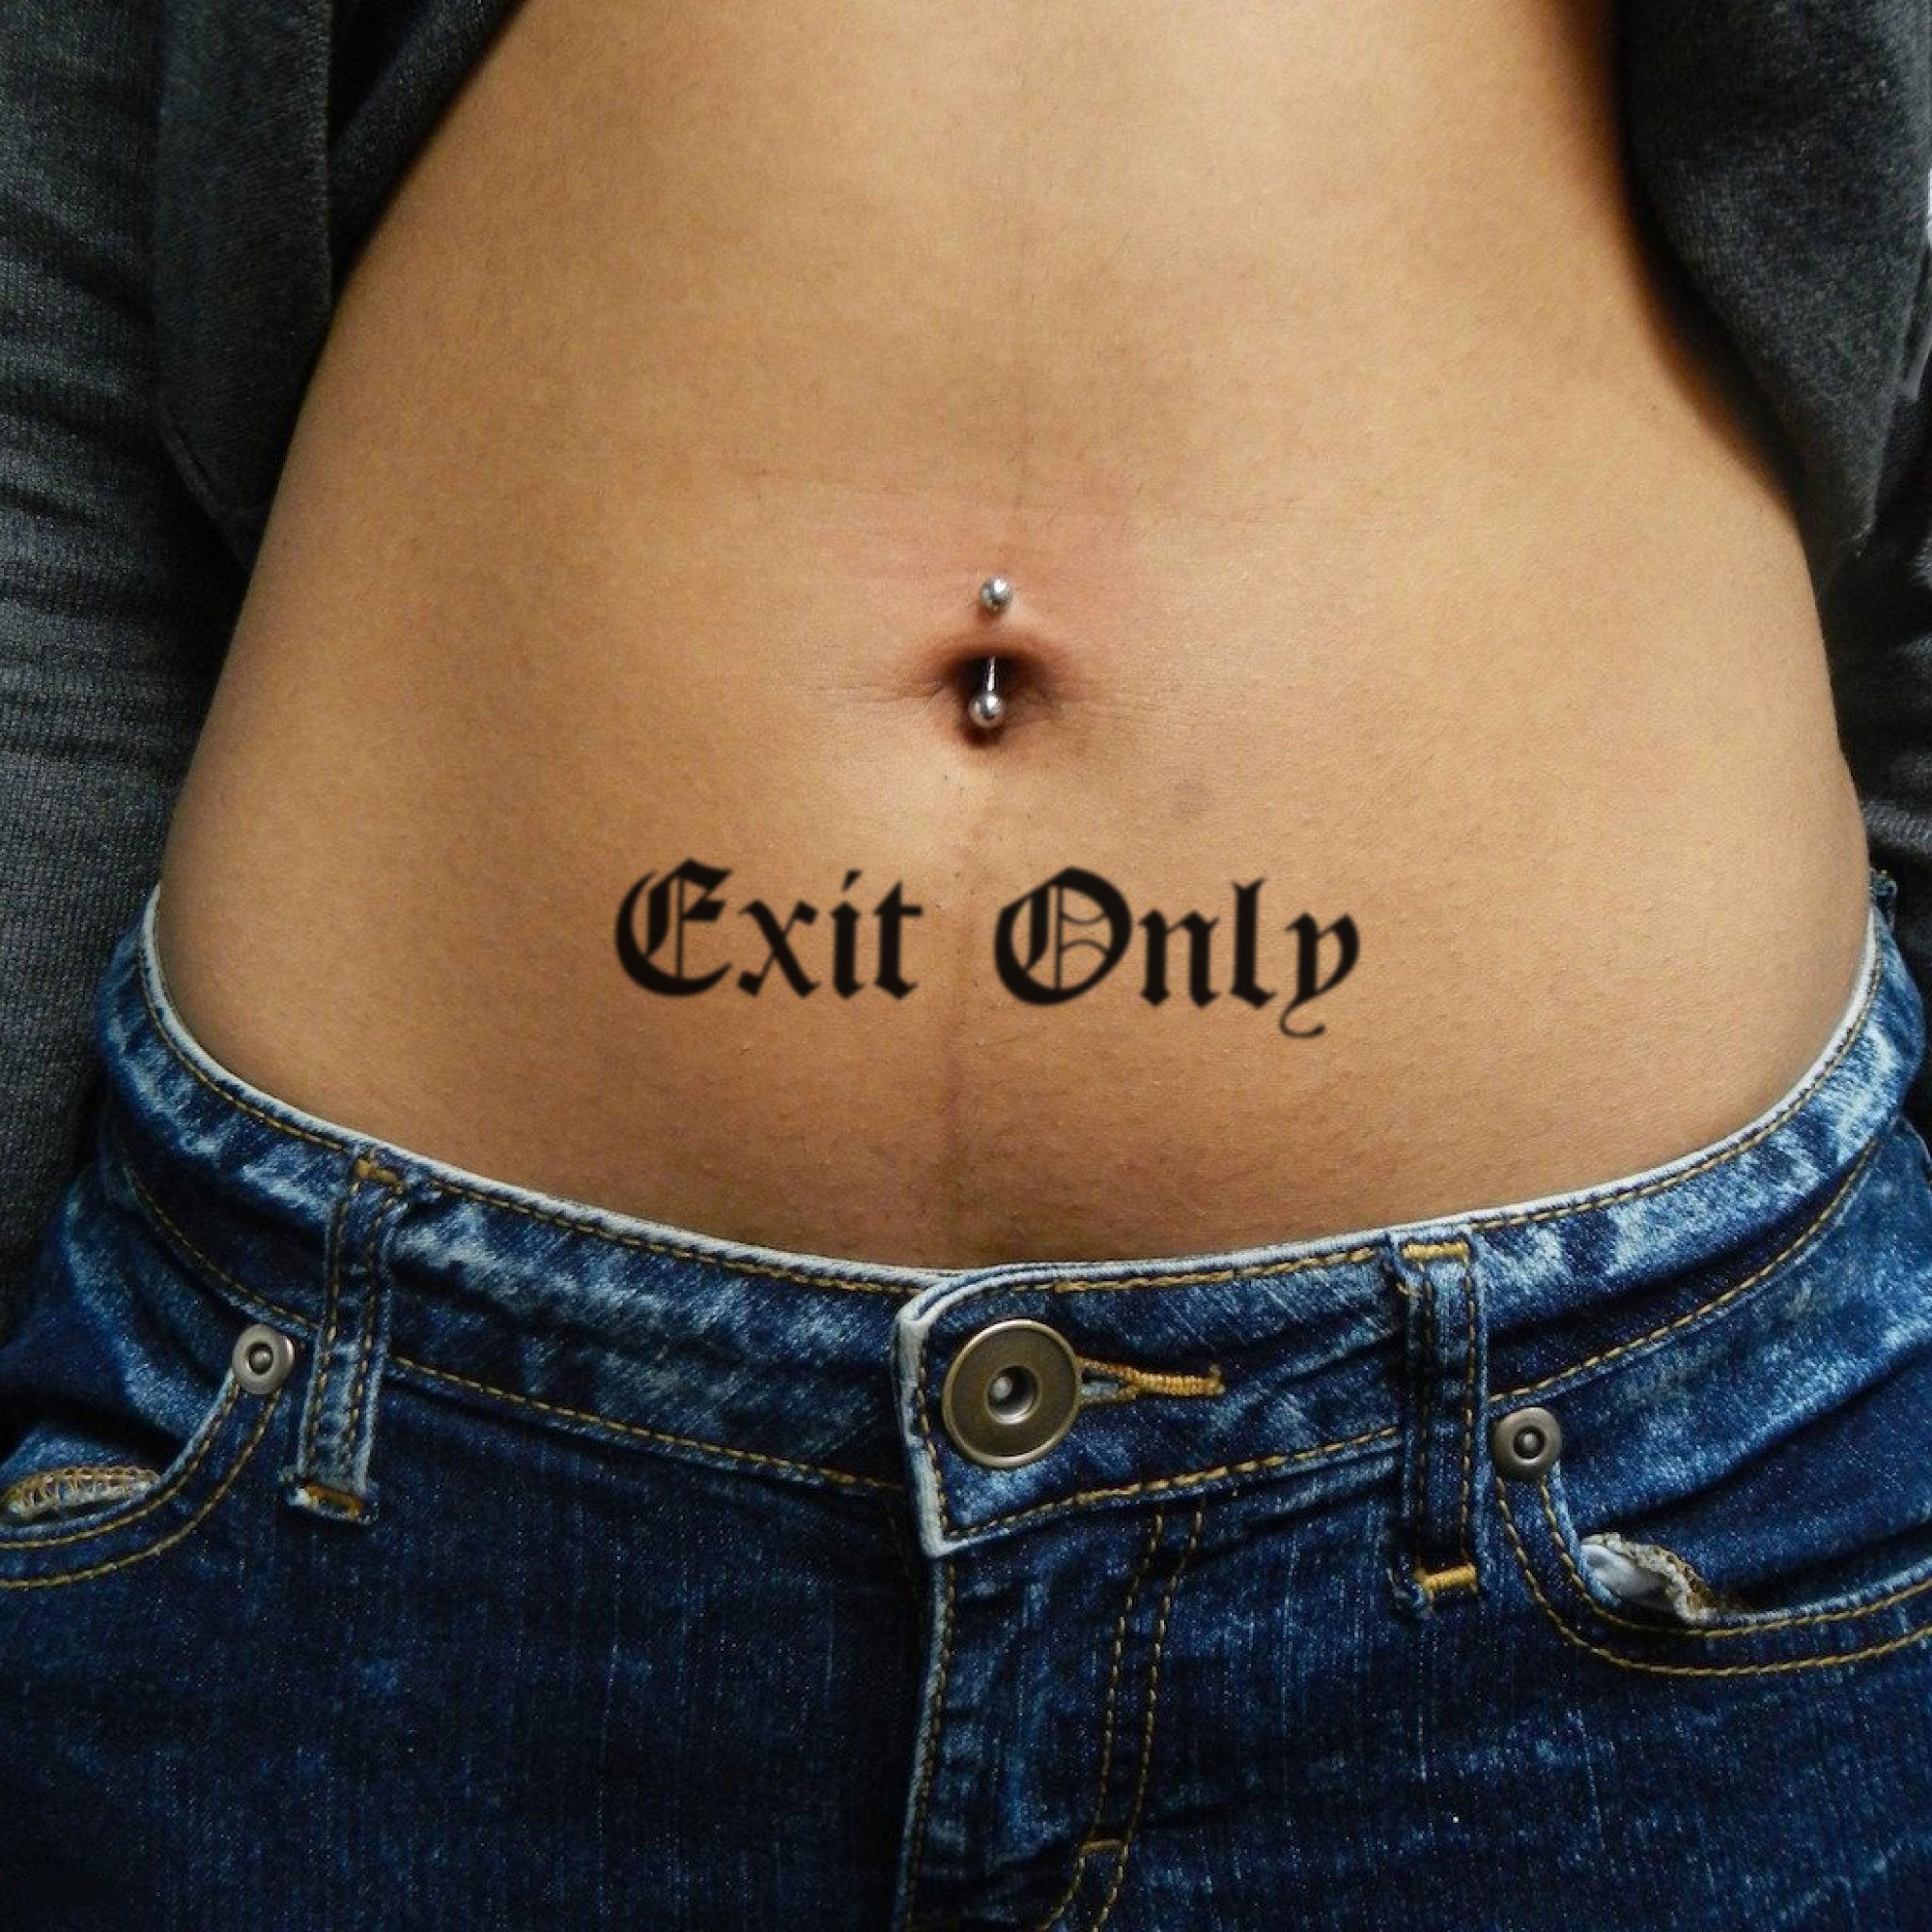 Belly Lettering Tattoo Chicano  Best Tattoo Ideas Gallery